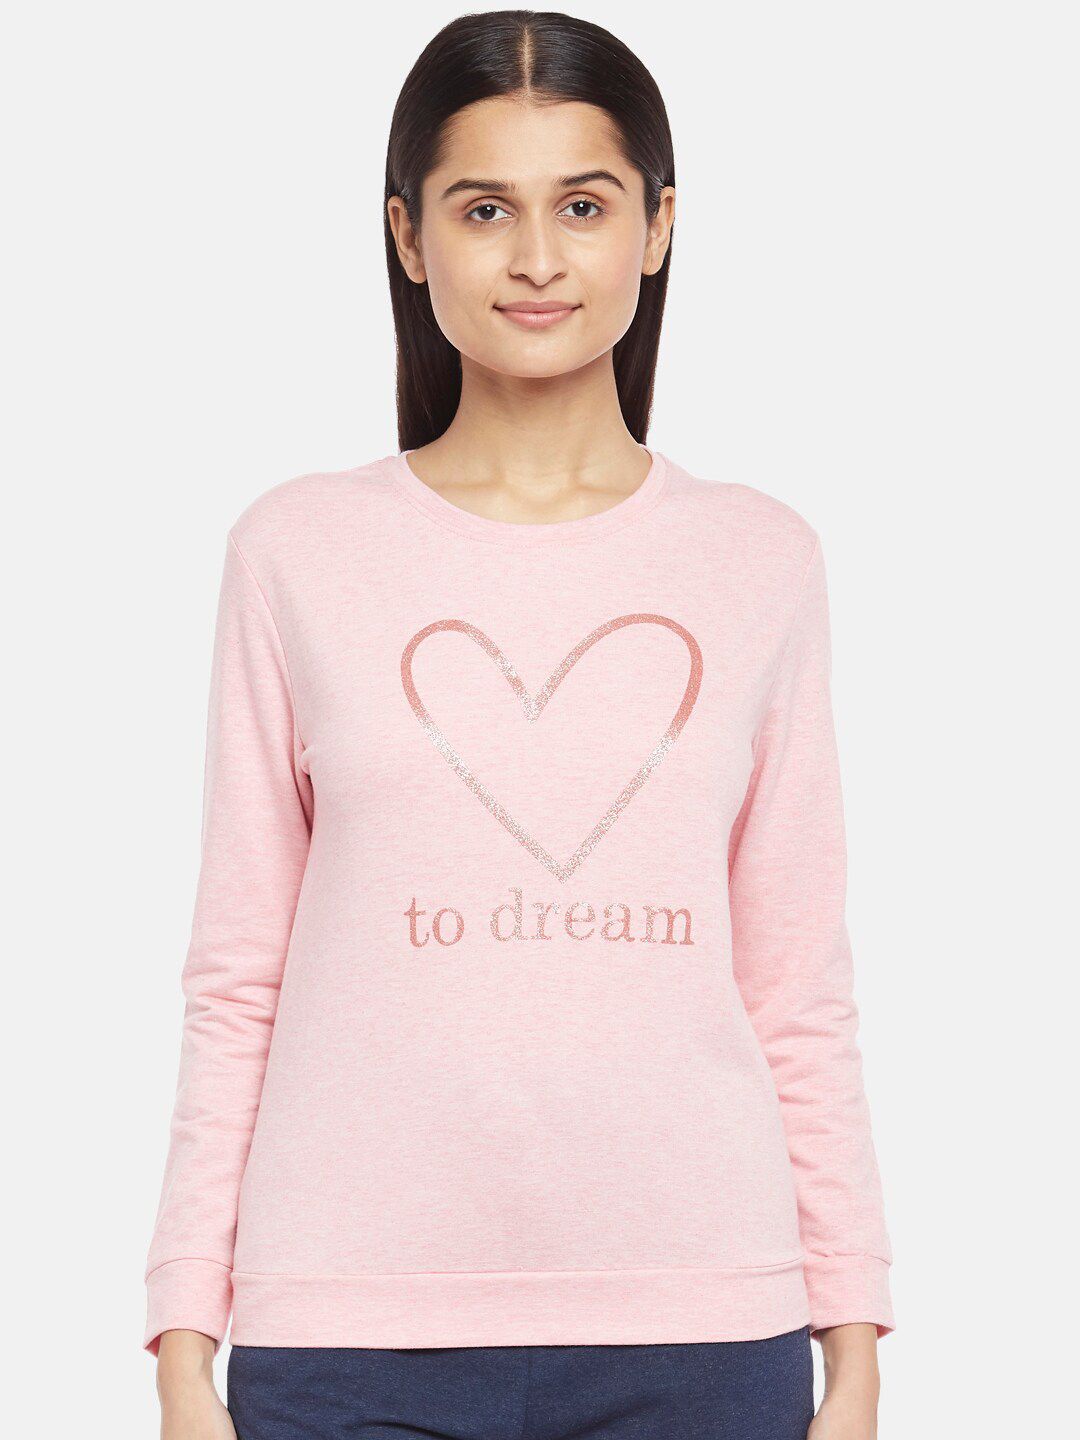 Dreamz by Pantaloons Women Pink Printed Round Neck Cotton Lounge T-shirt Price in India